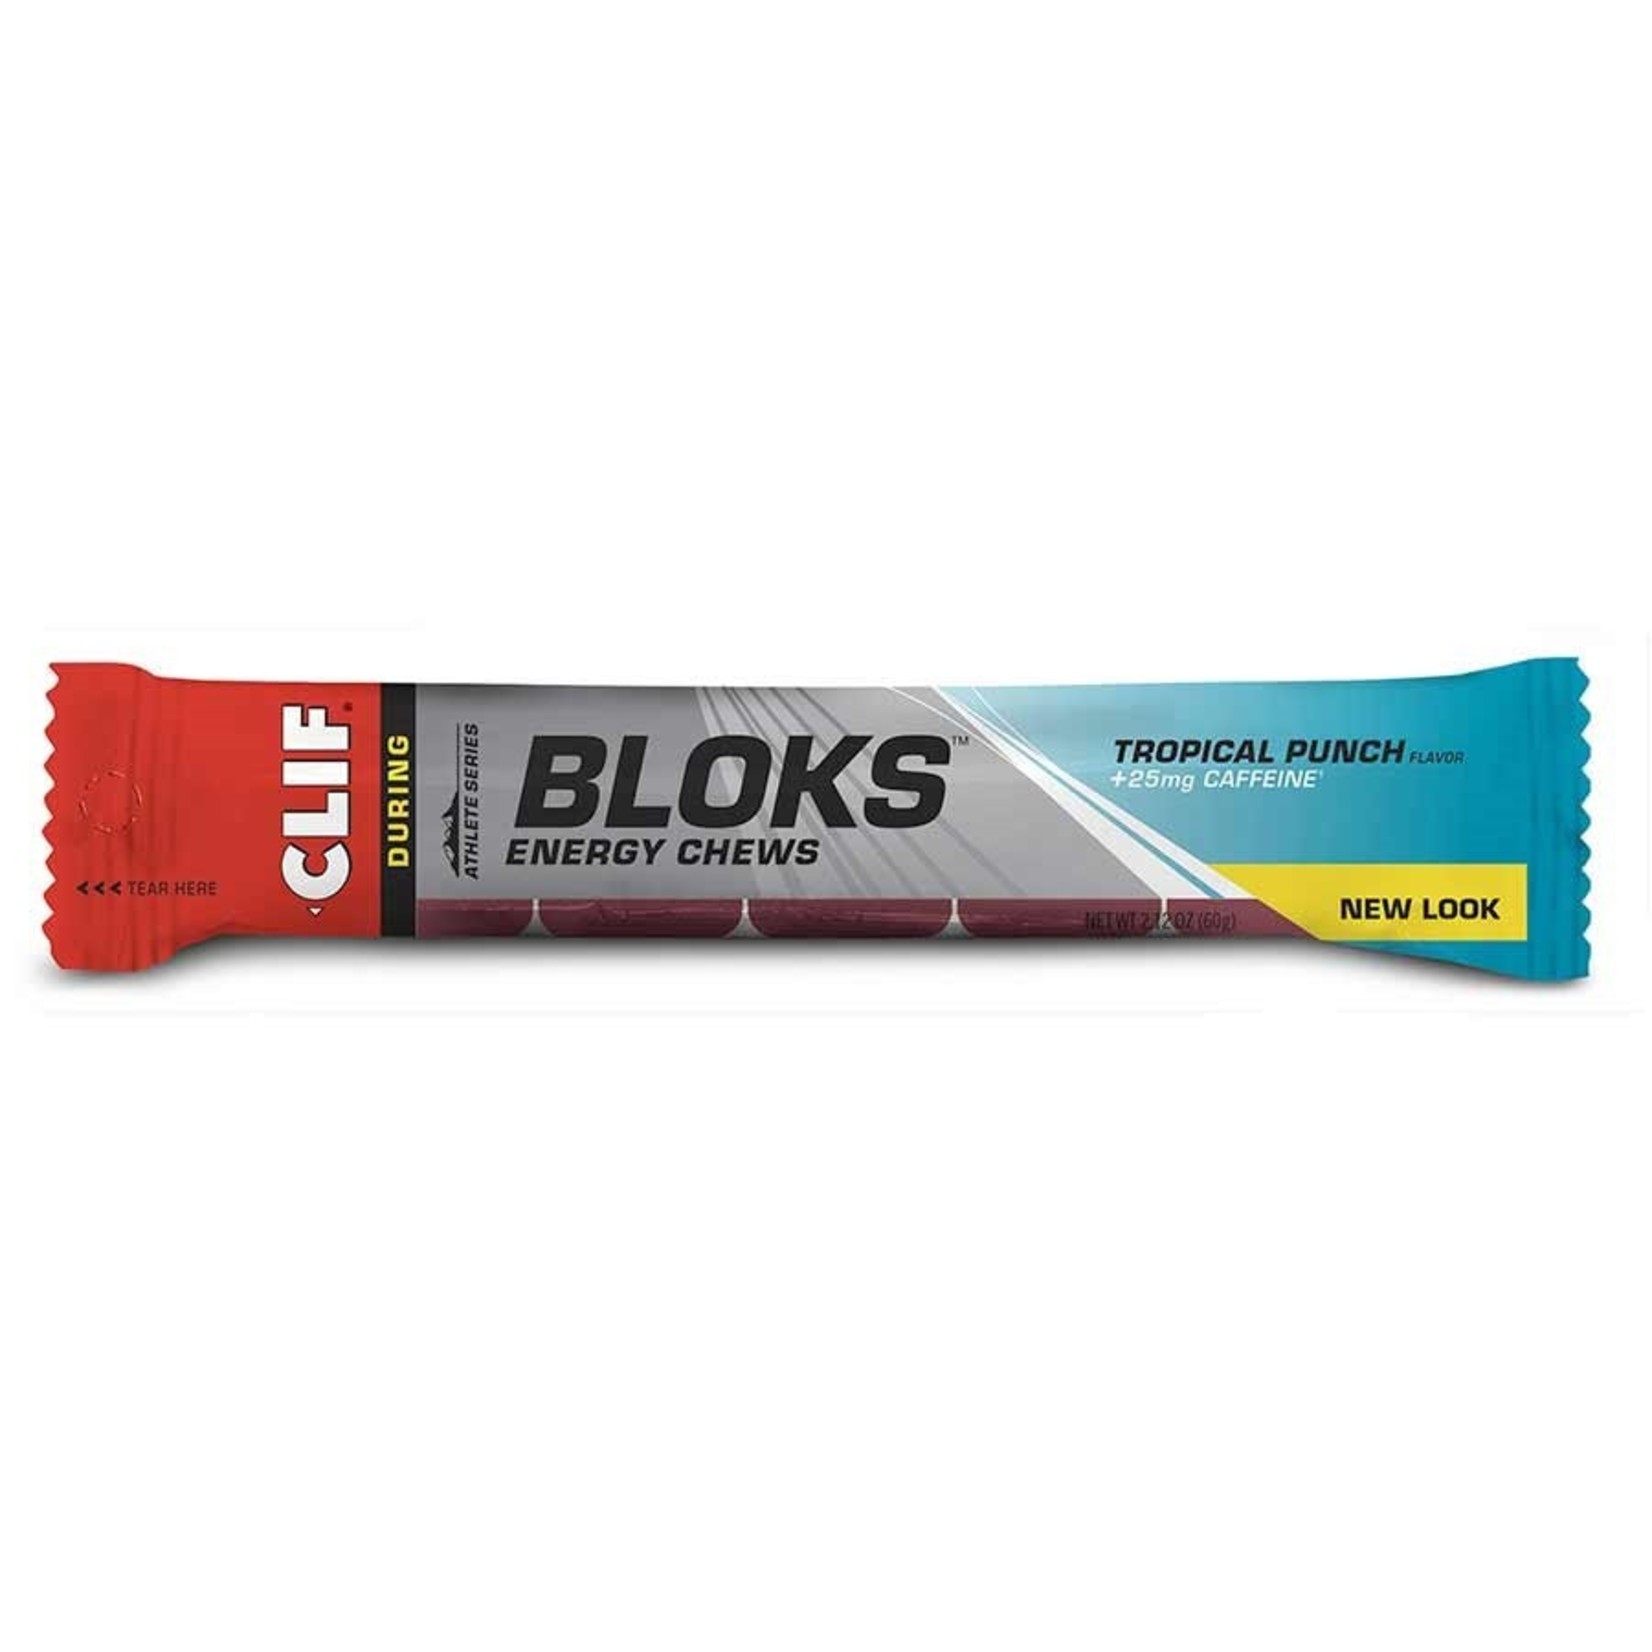 Clif Clif, Bloks, Chews, Tropical punch, Caffeinated